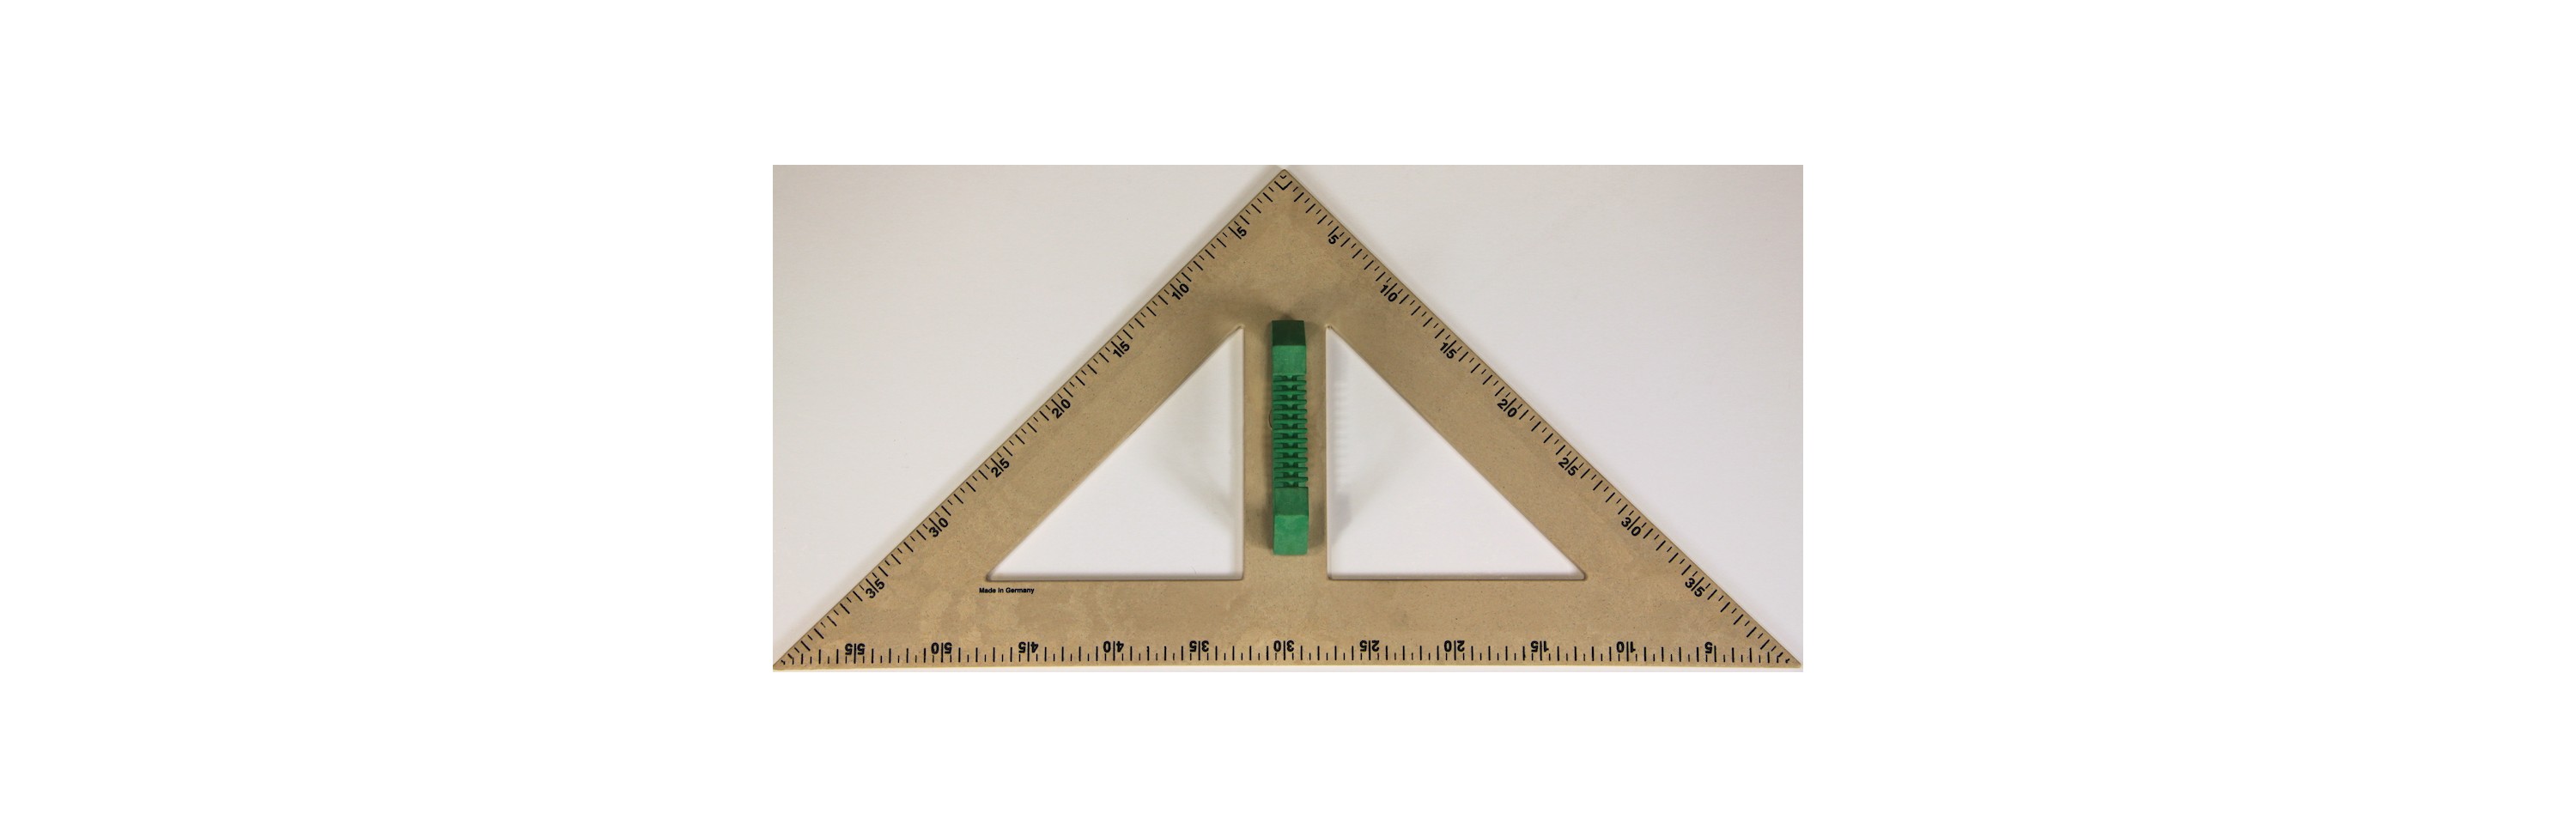 Wissner® active learning - Set square 60cm Made from RE-Wood® RE-Plastic®